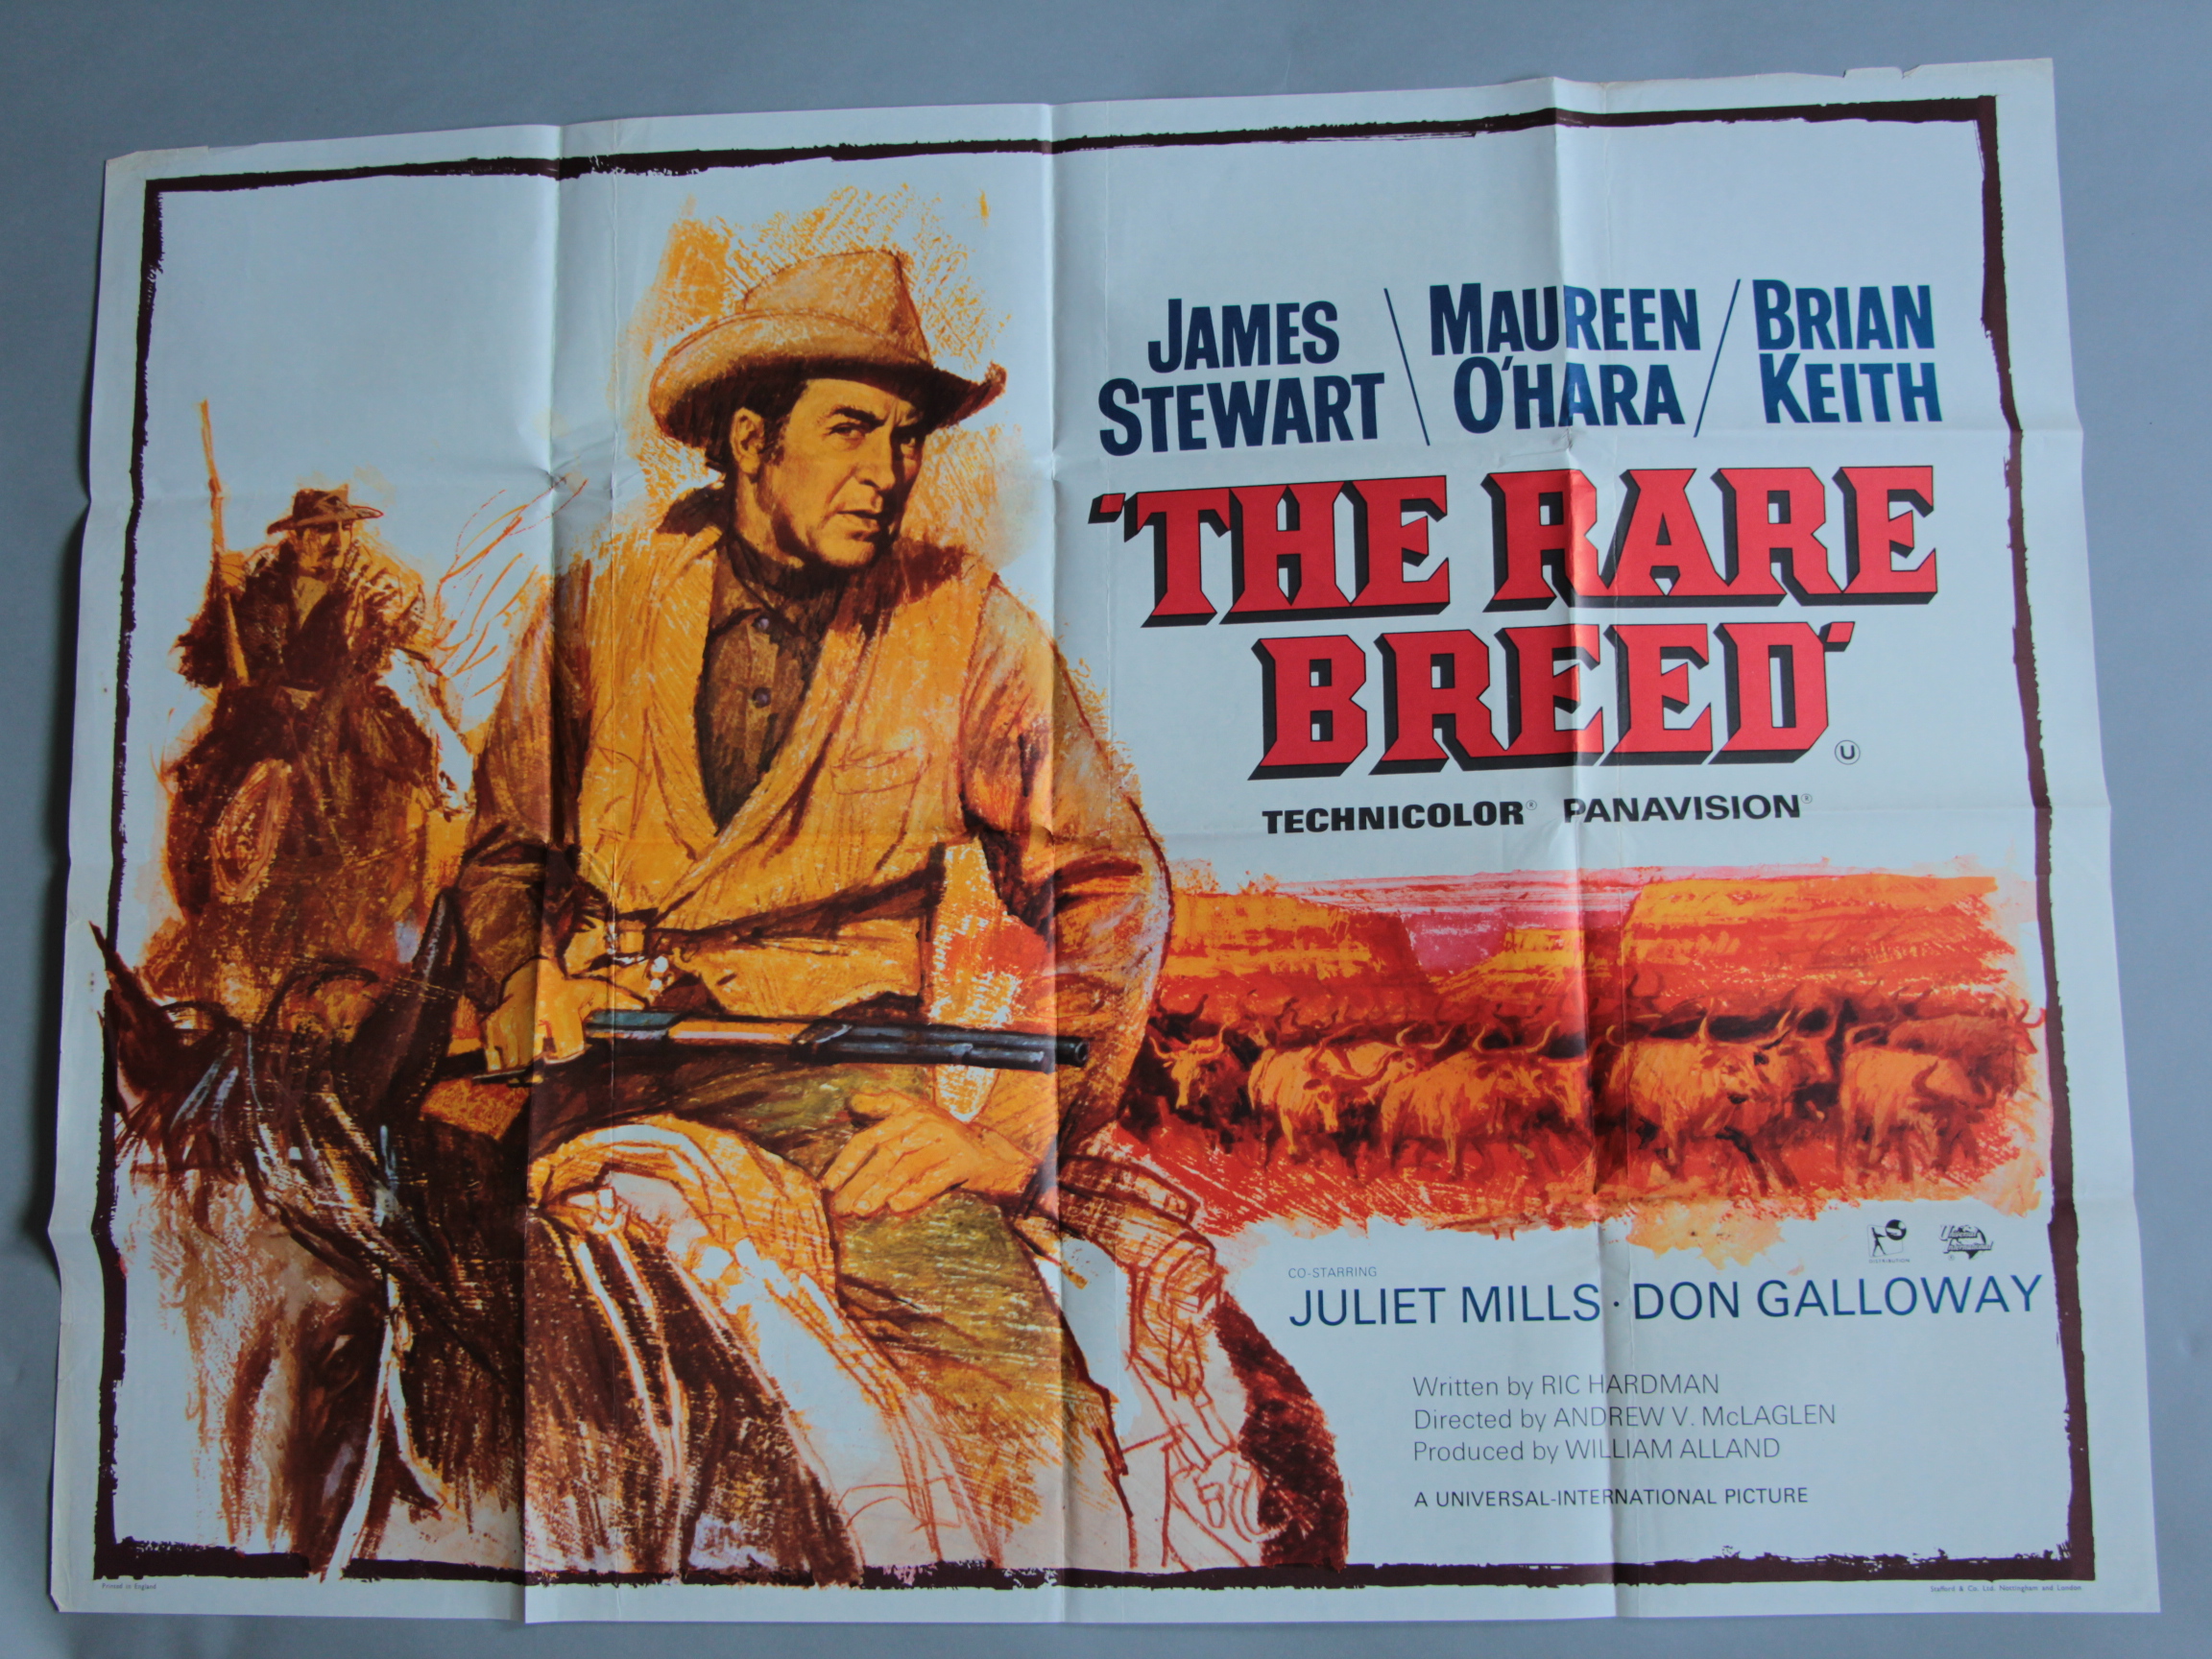 Collection of Western genre British Quad Film Posters 30x40" including: The Rare Breed (1966) - Image 14 of 15